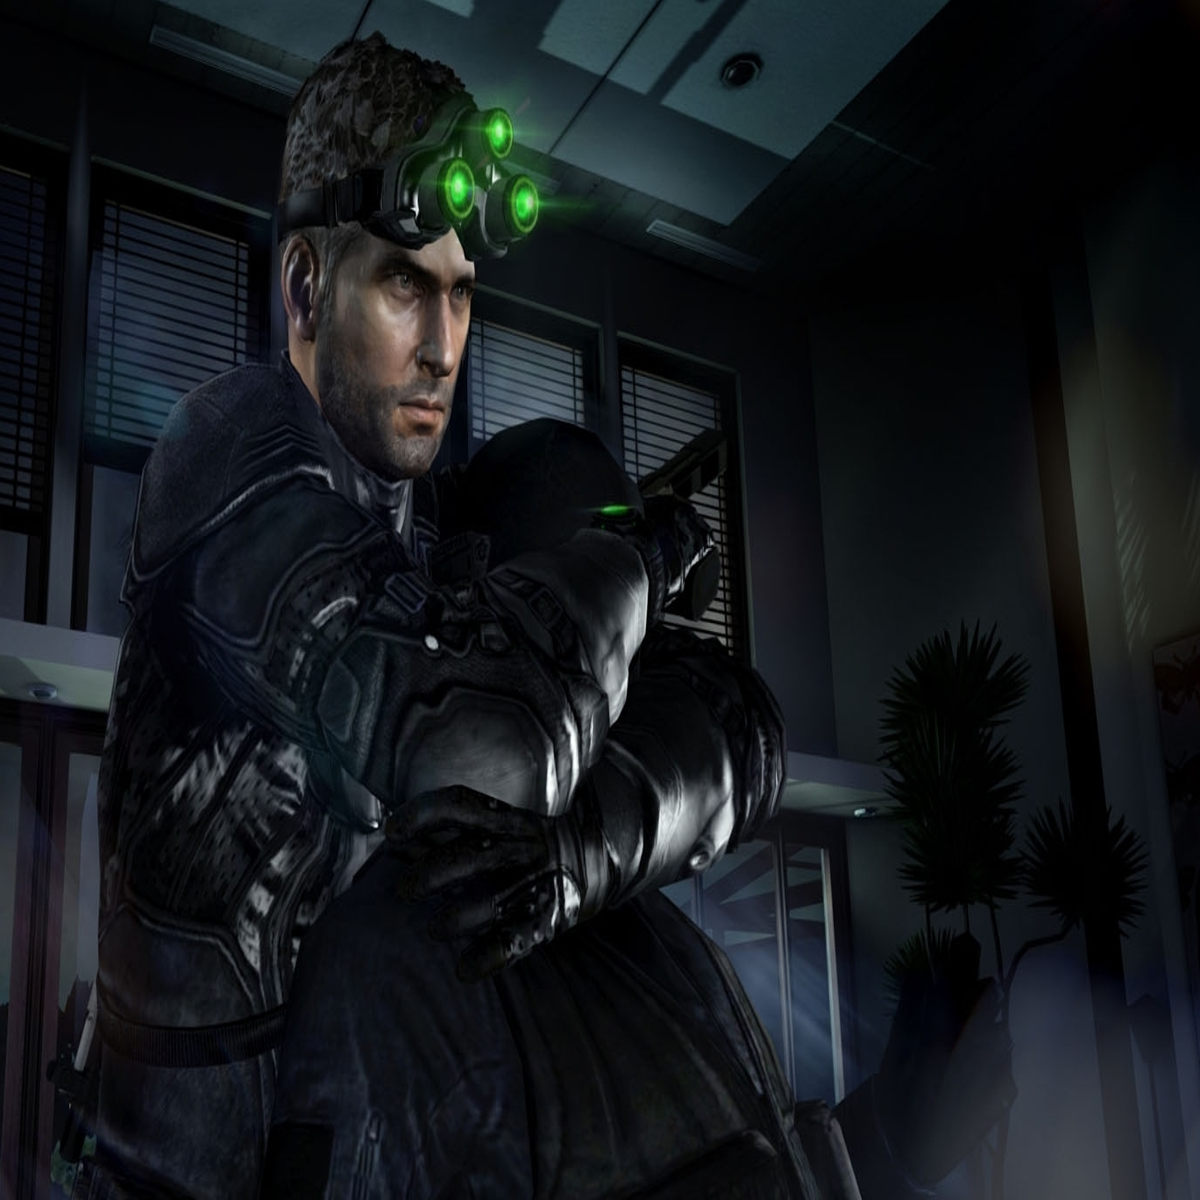 Tom Clancy's Splinter Cell: Blacklist  Video Game Reviews and Previews PC,  PS4, Xbox One and mobile